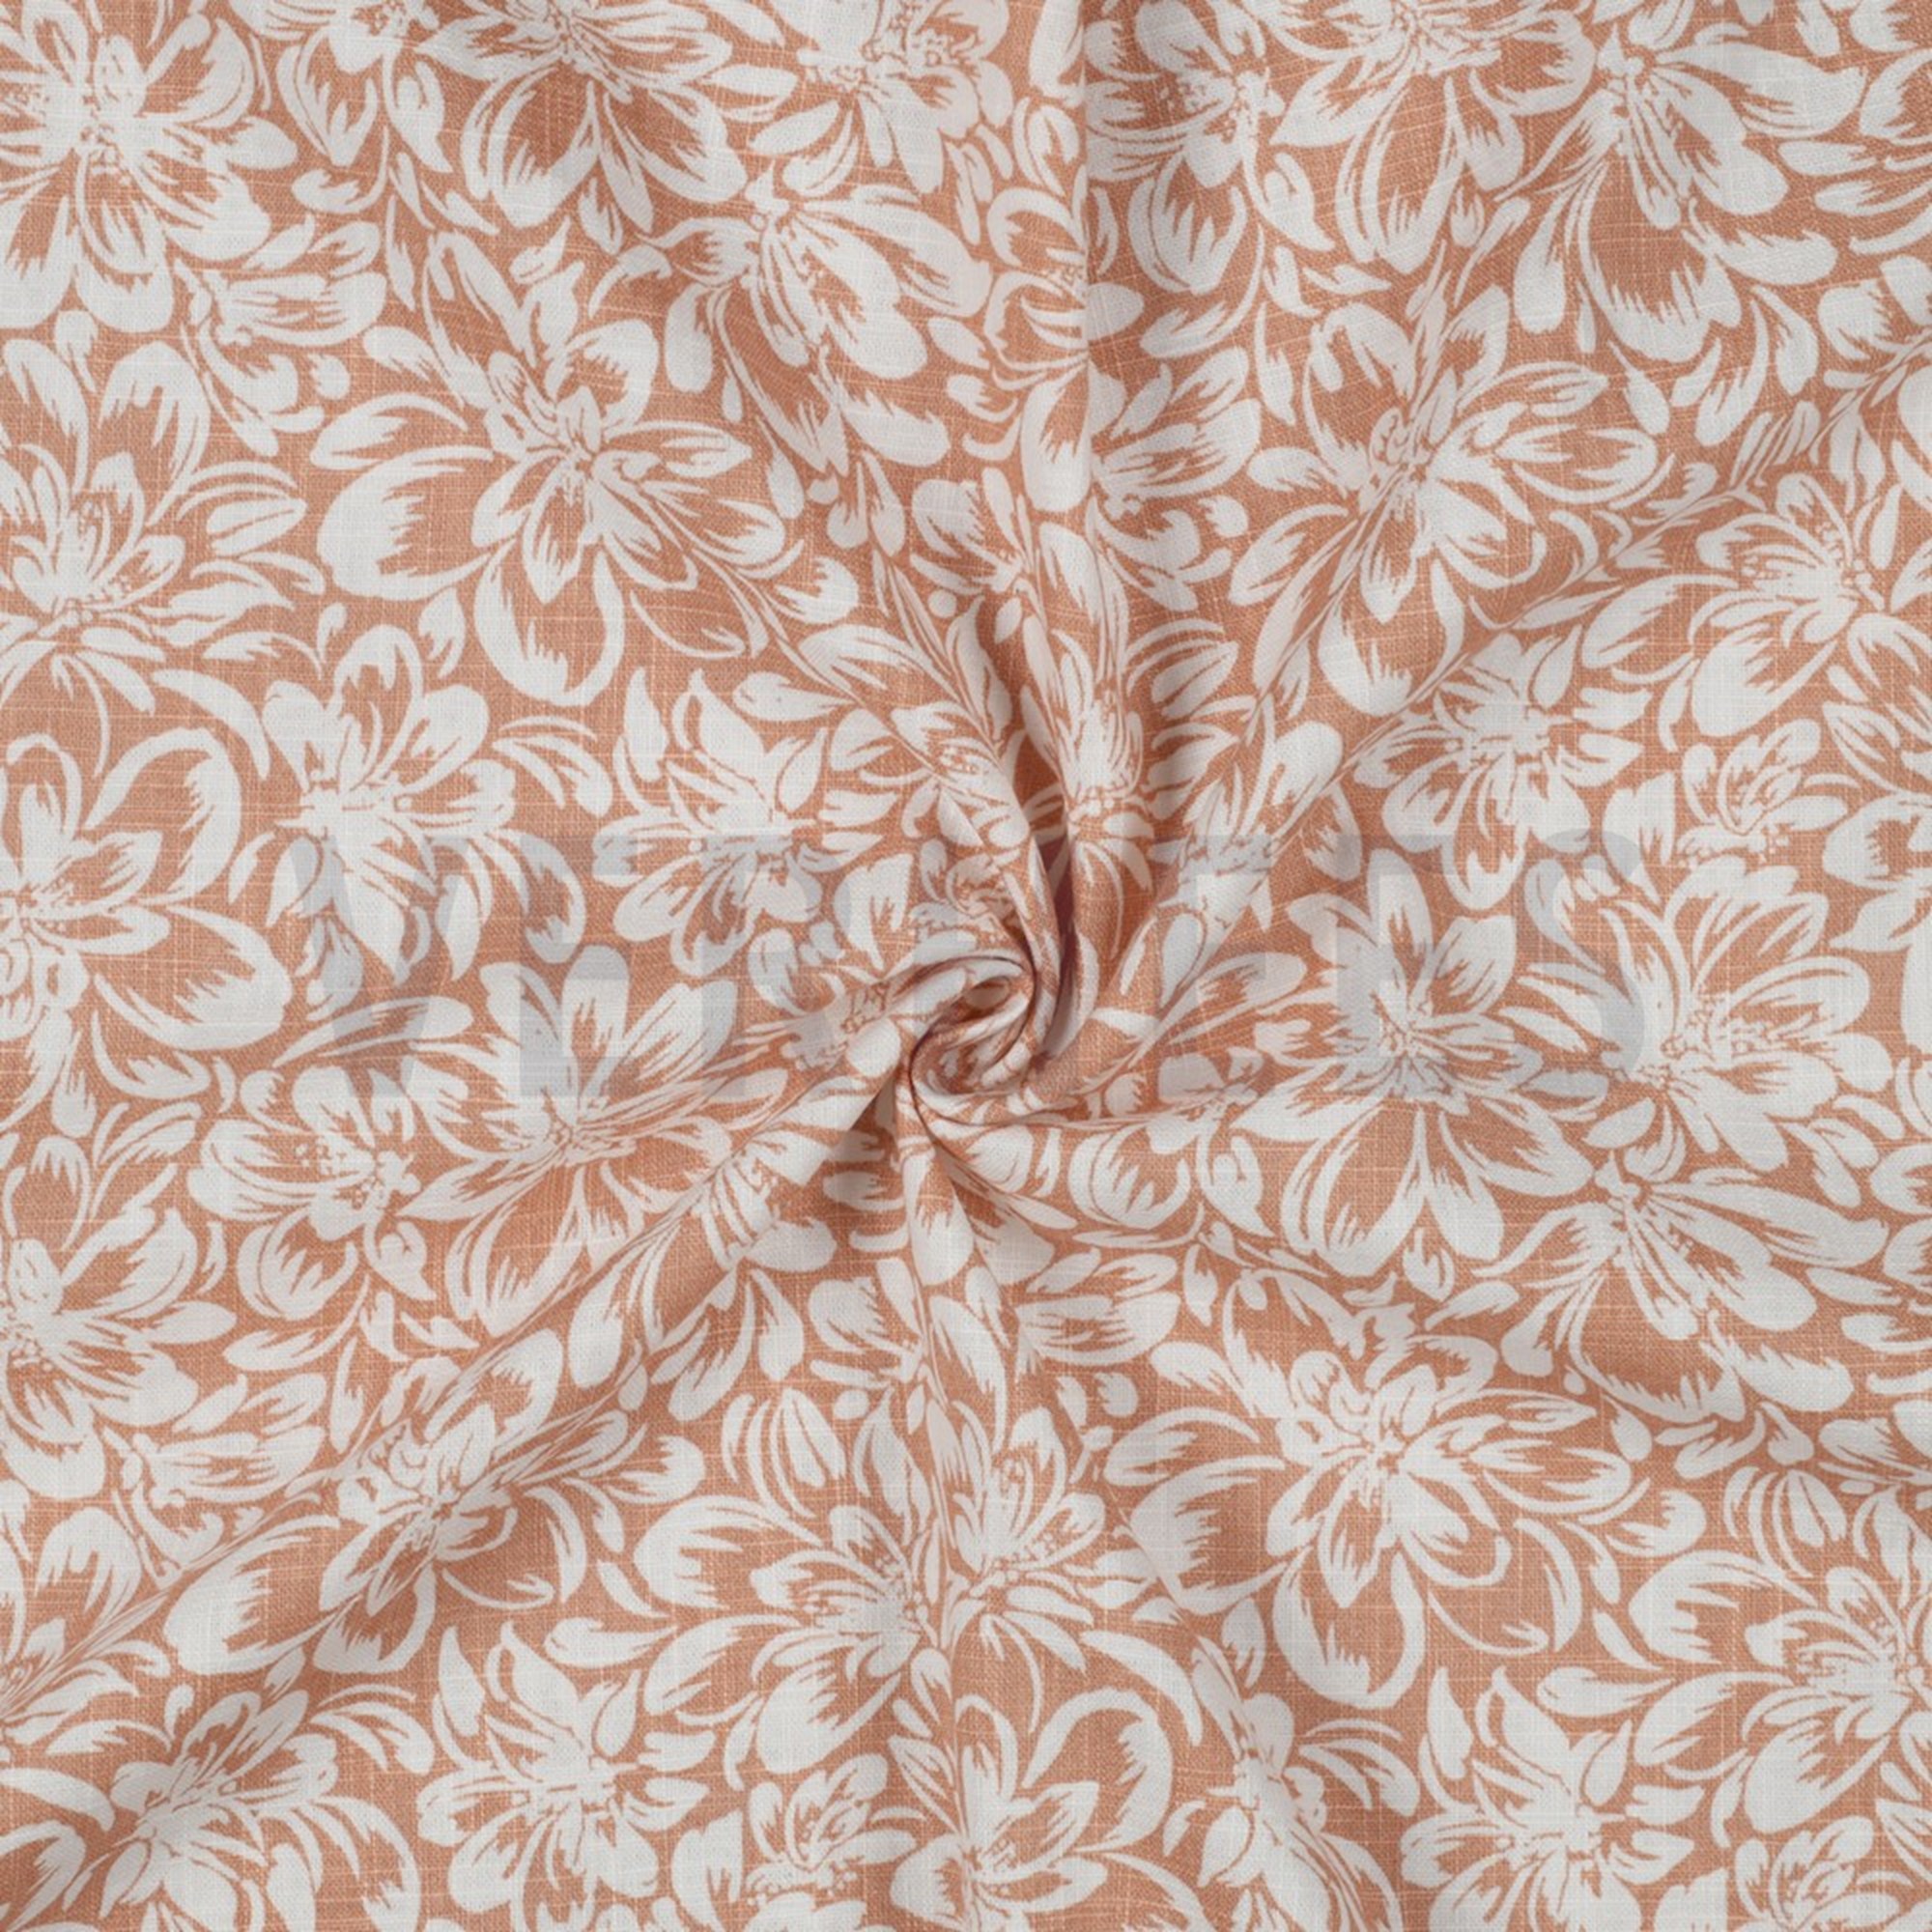 LINEN WASHED FLOWERS LIGHT APRICOT (high resolution) #2